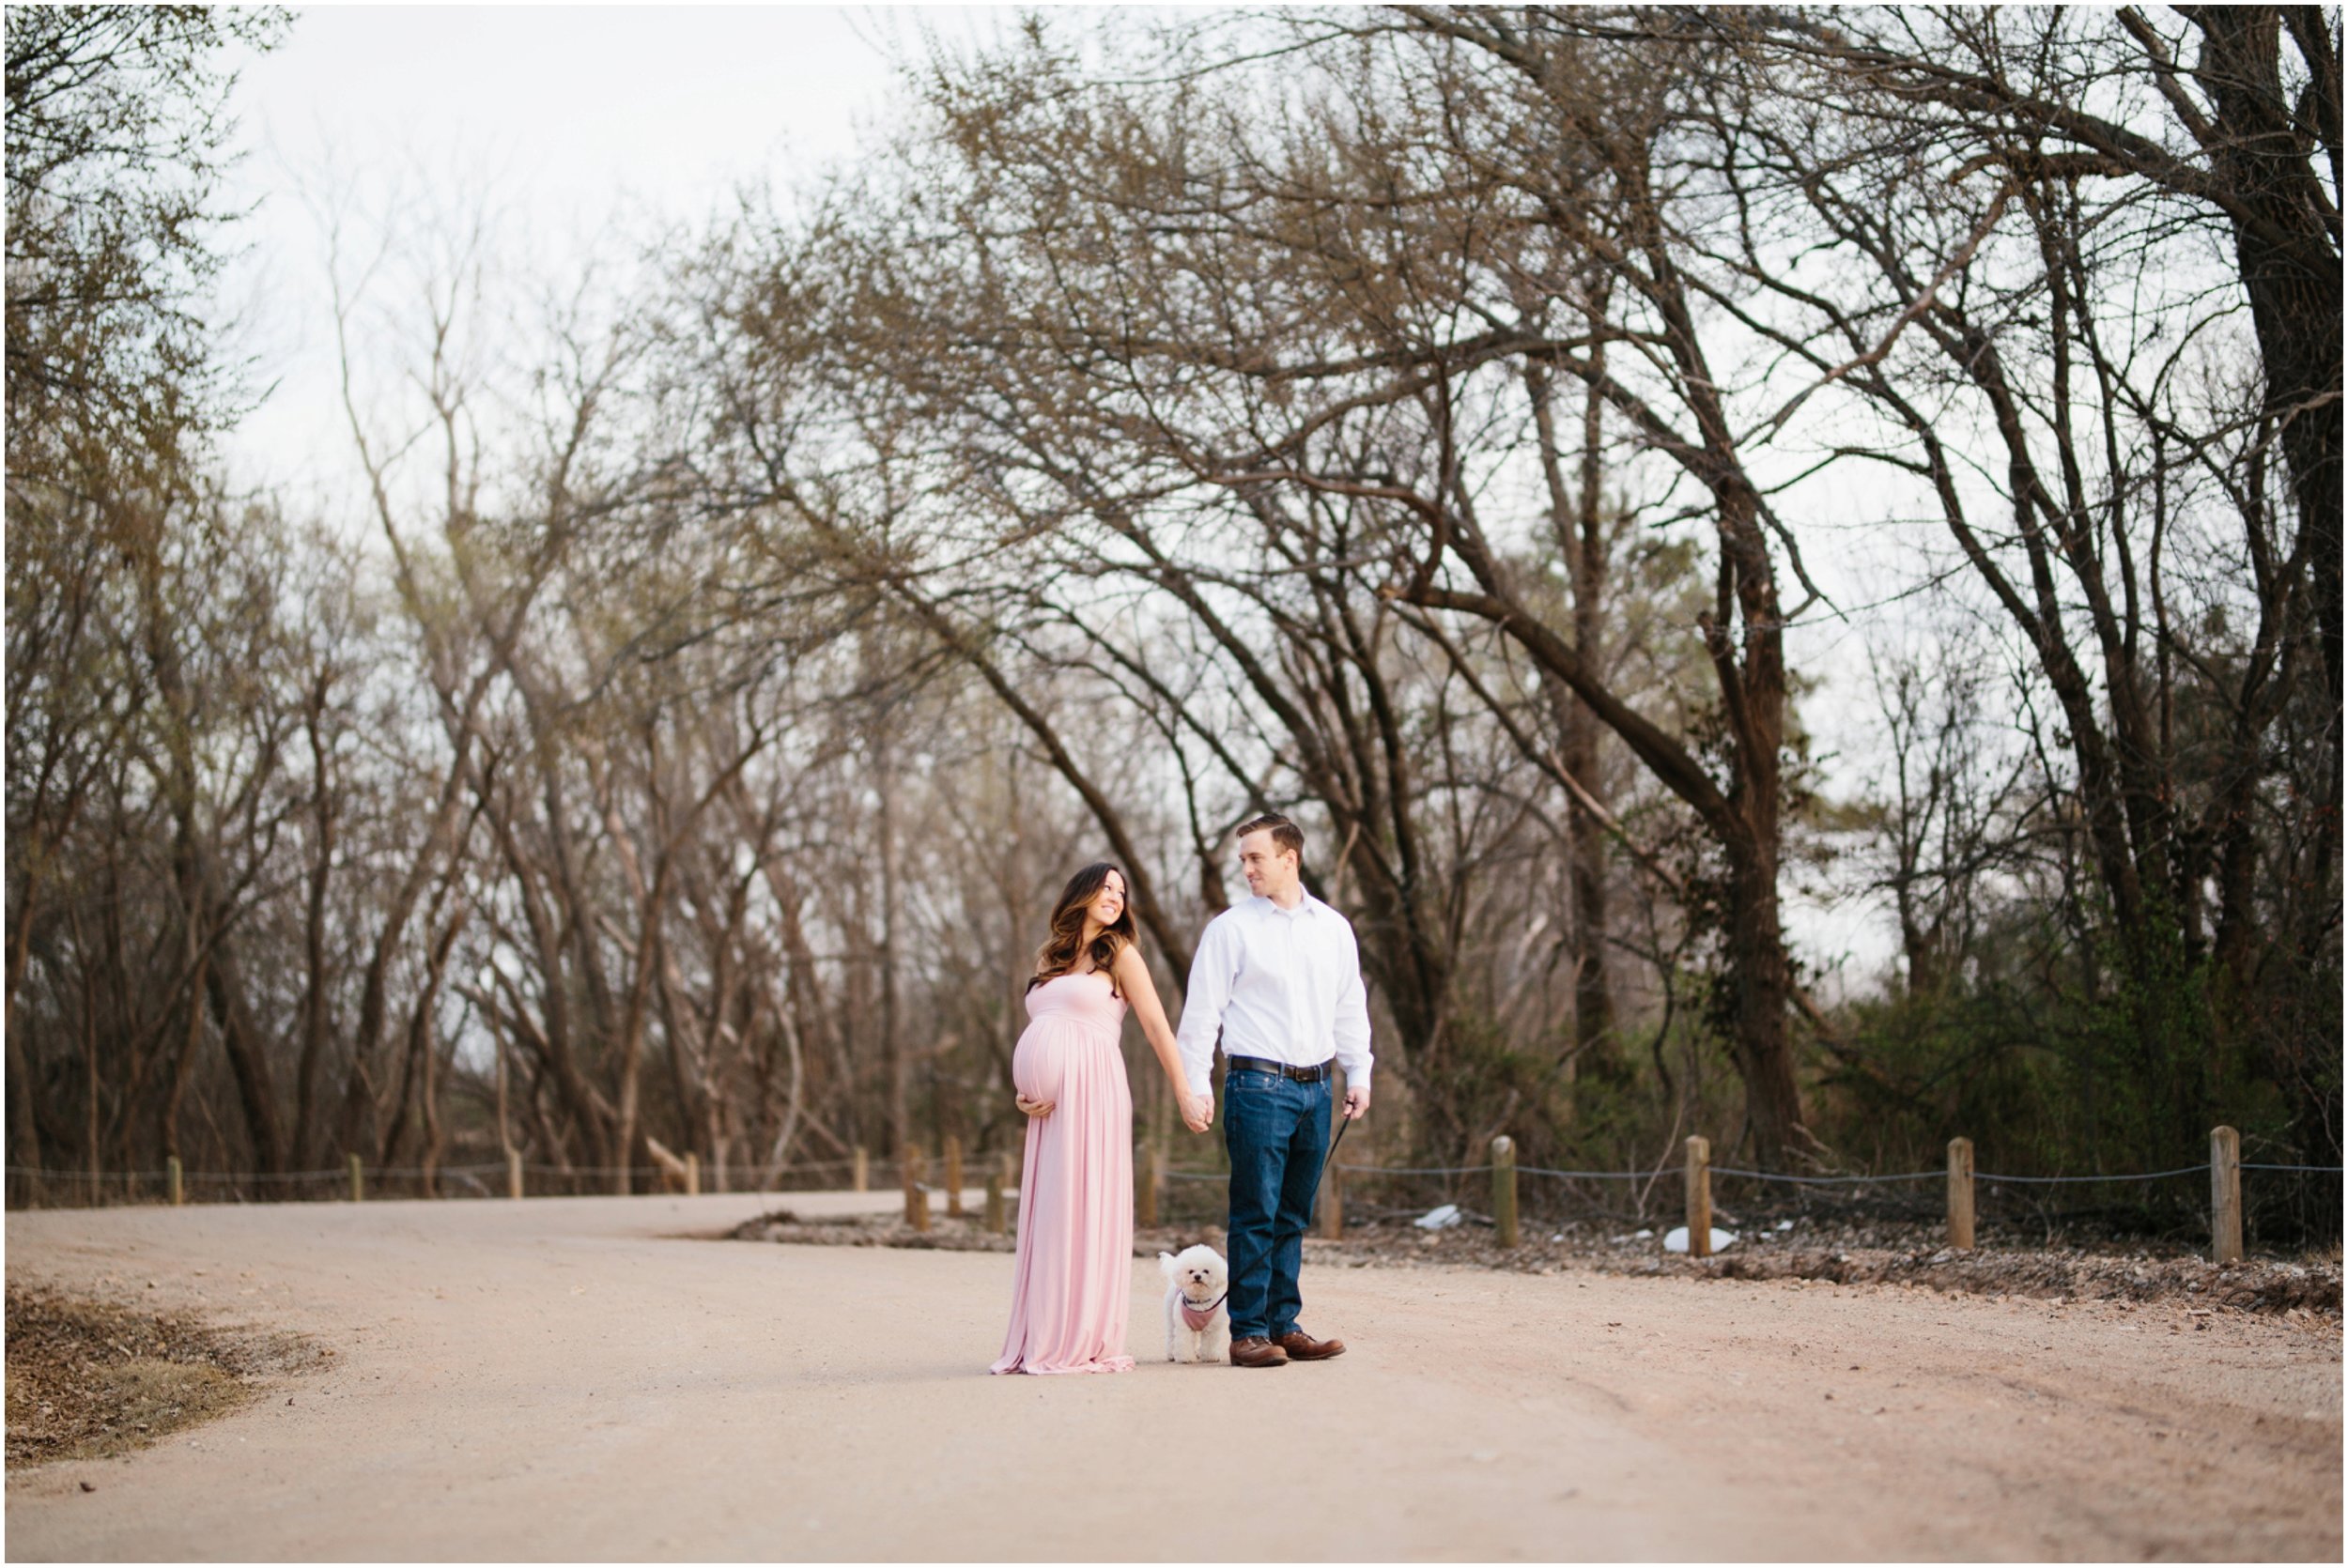 family with dog maternity photos outdoors on dirt road at lake hefner